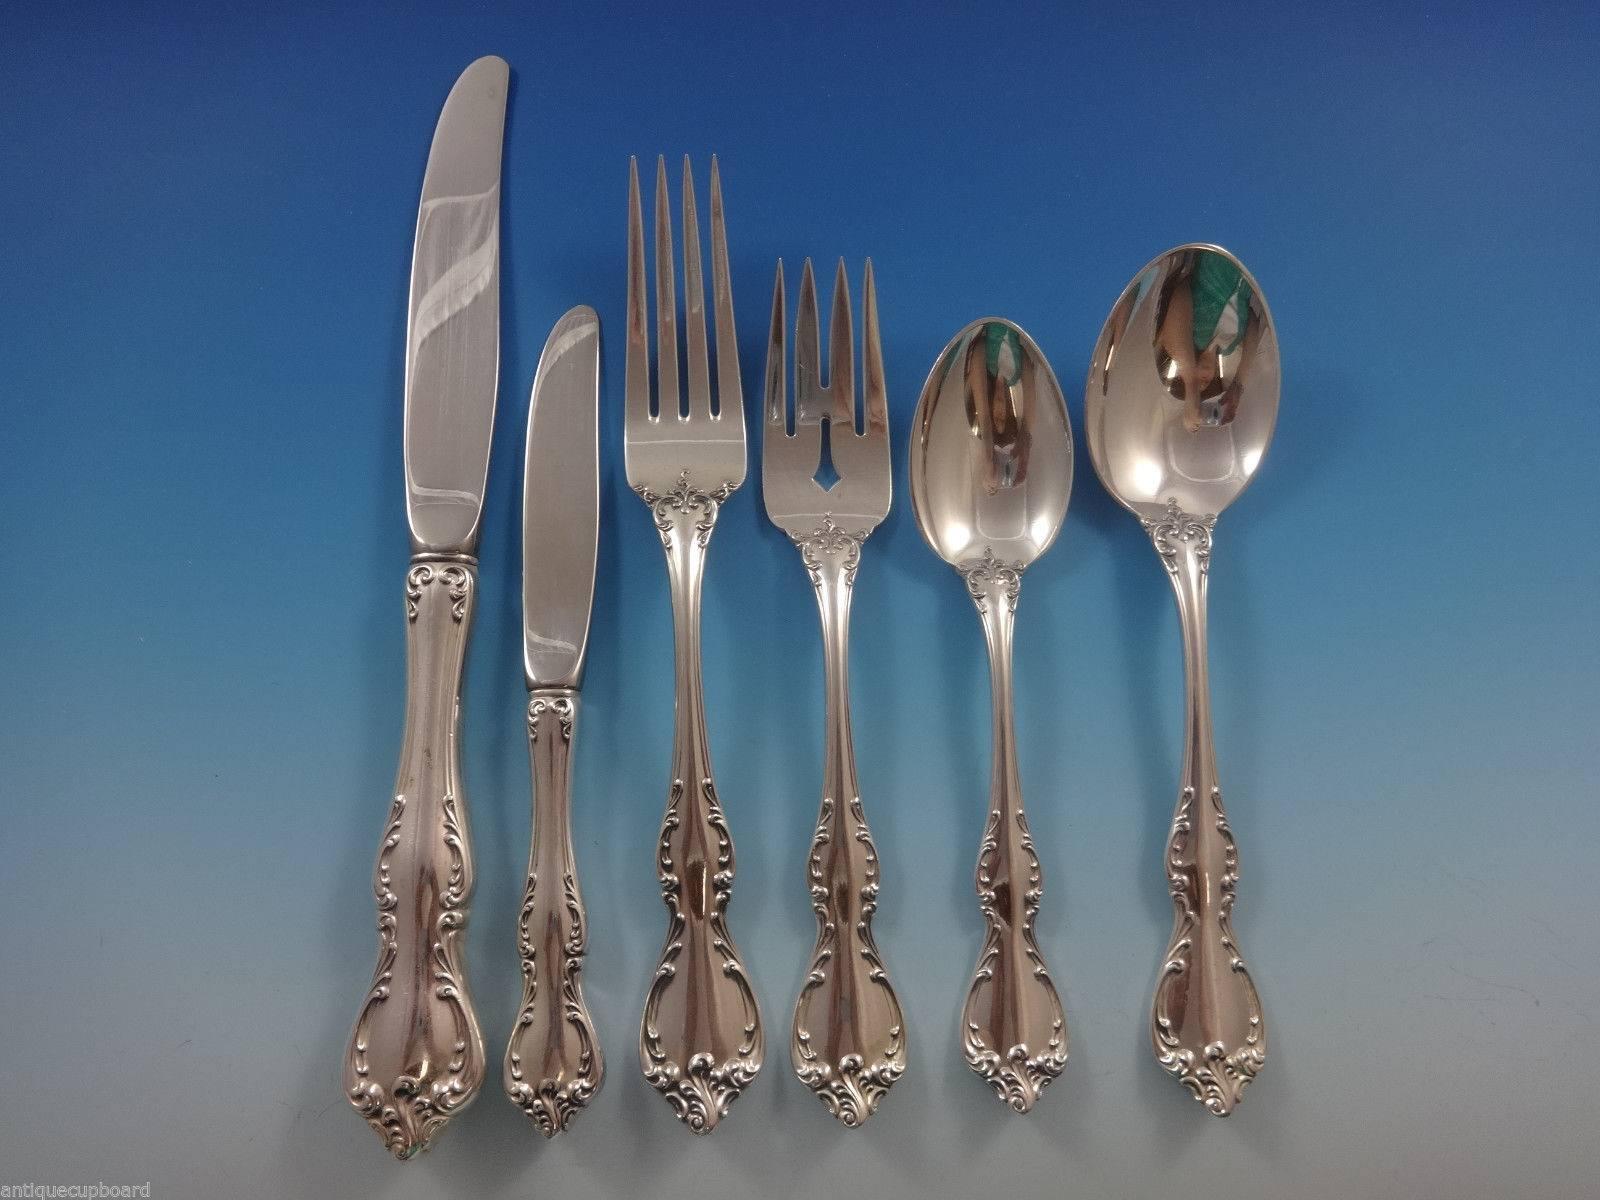 Stunning DEBUSSY BY TOWLE sterling silver Flatware set - 75 Pieces. This set includes: 

12 KNIVES, 9